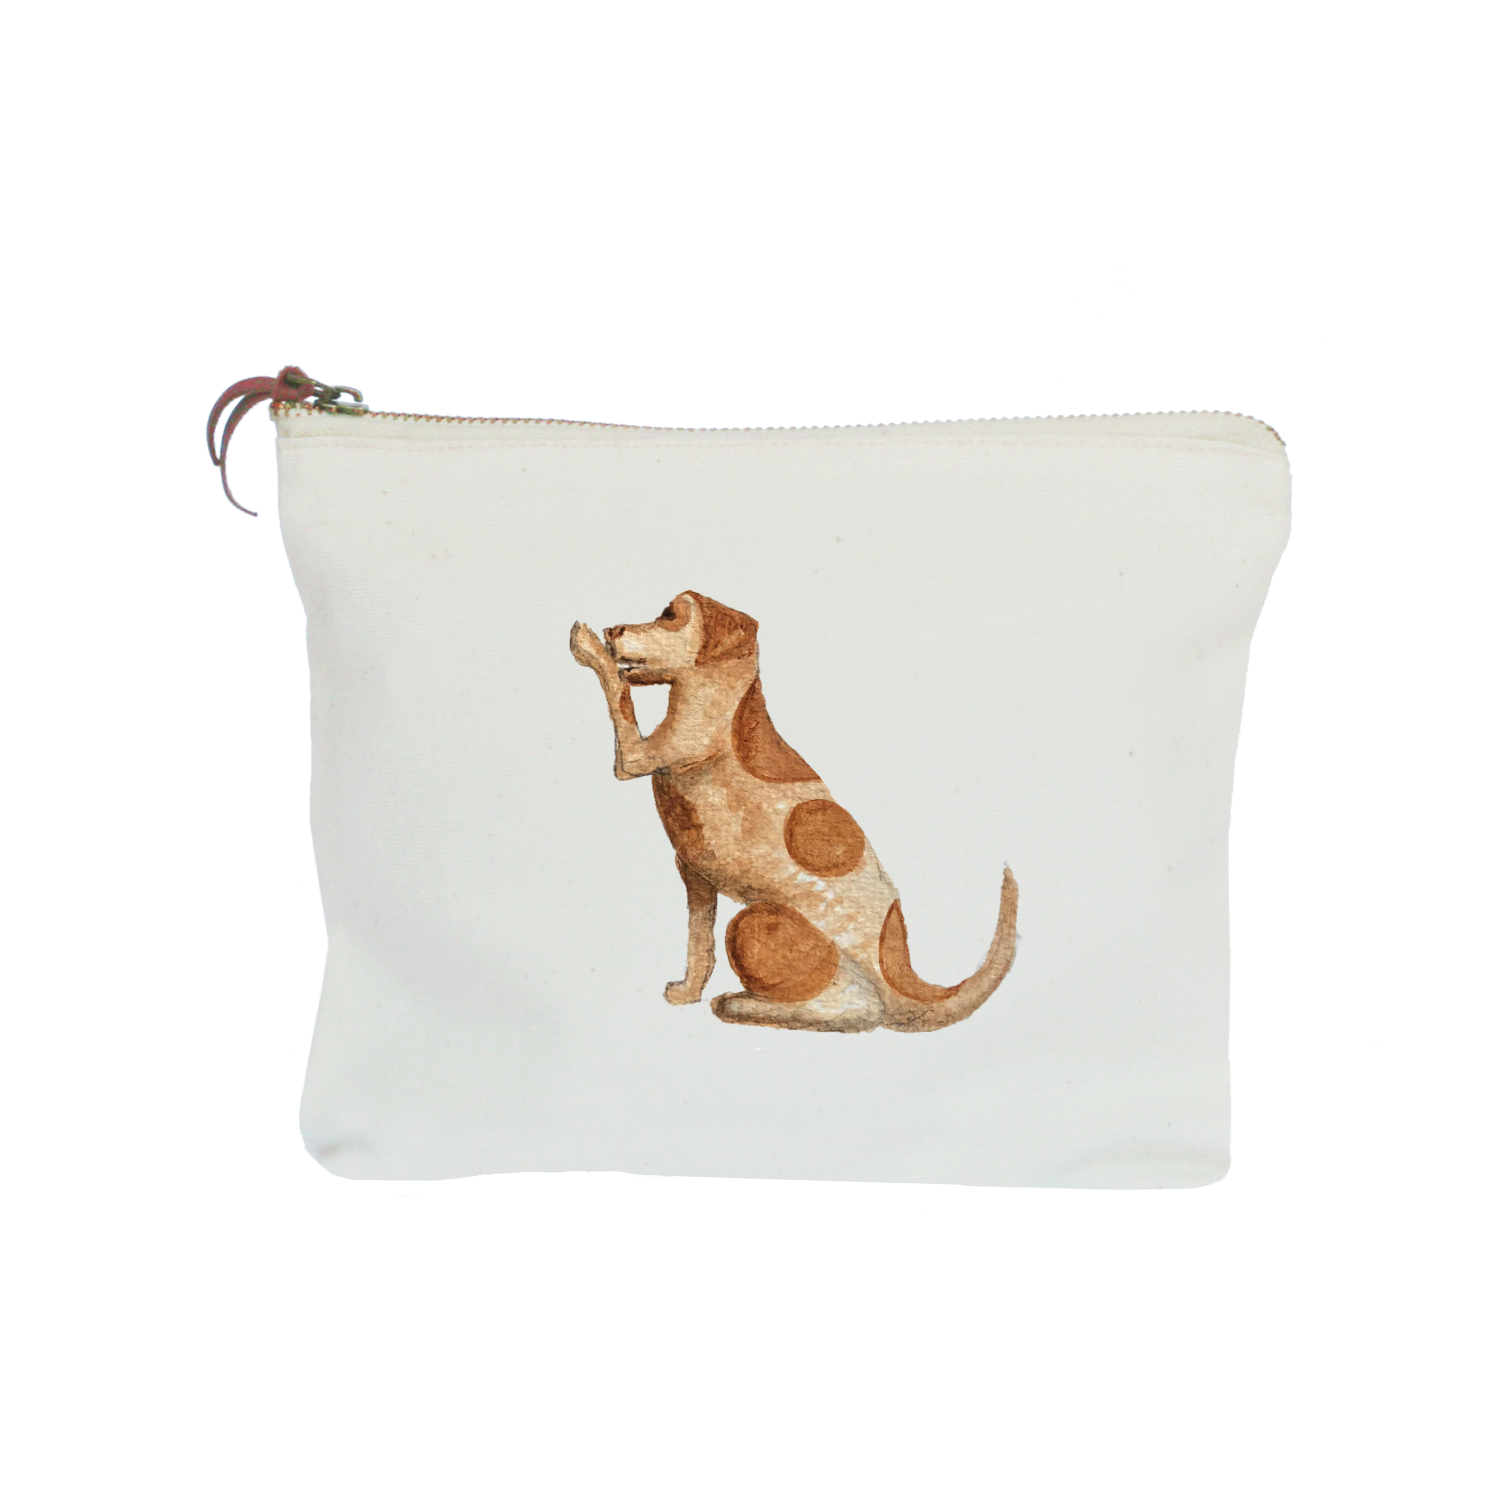 spotted dog zipper pouch